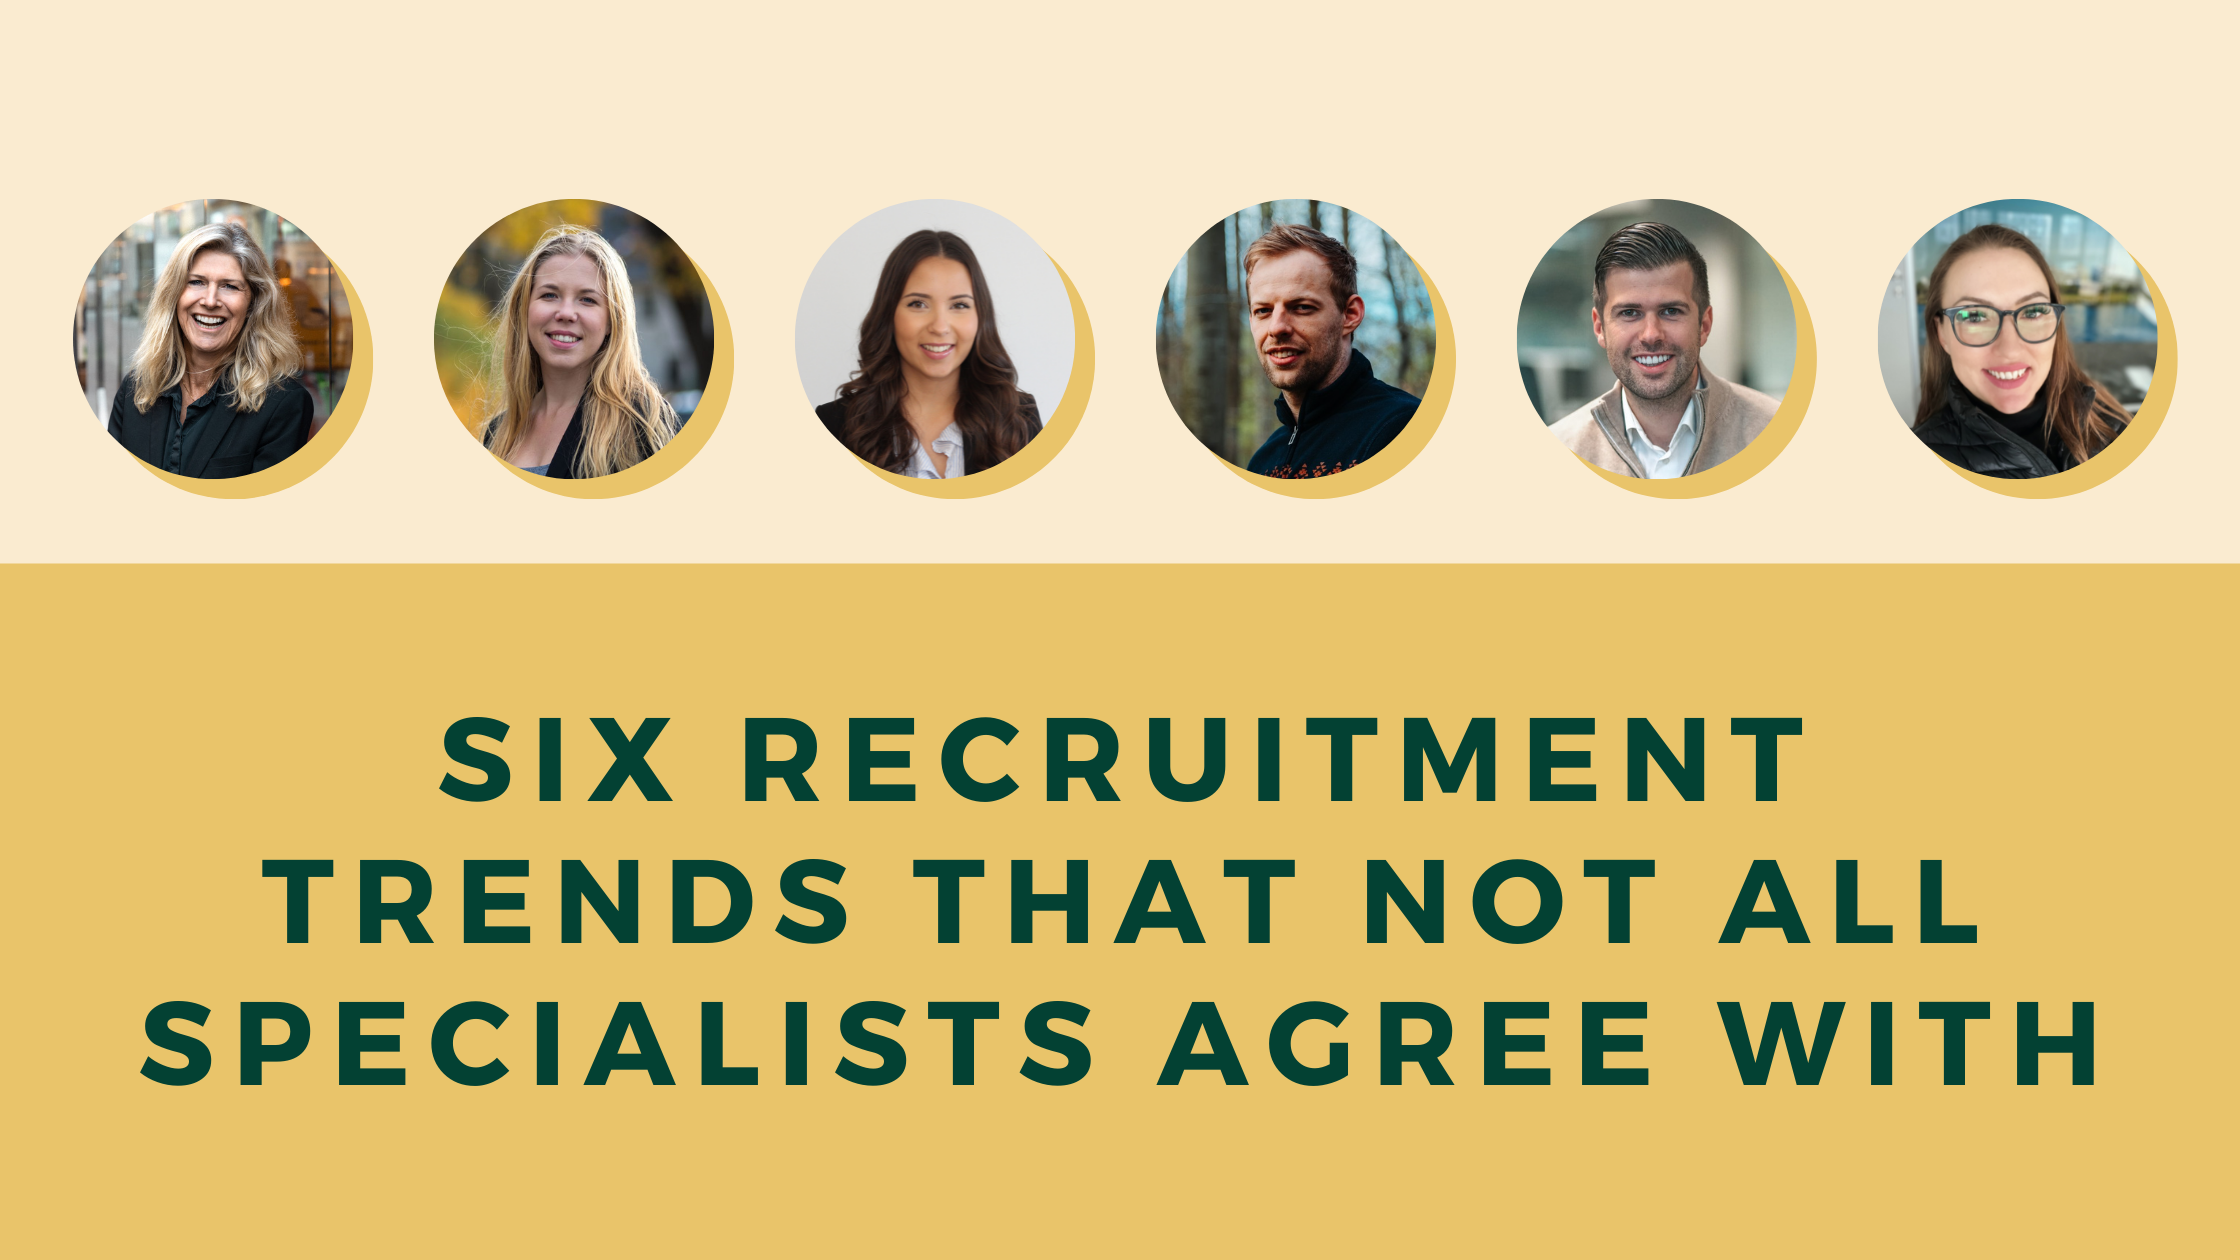 Six recruitment trends that not all specialists agree with